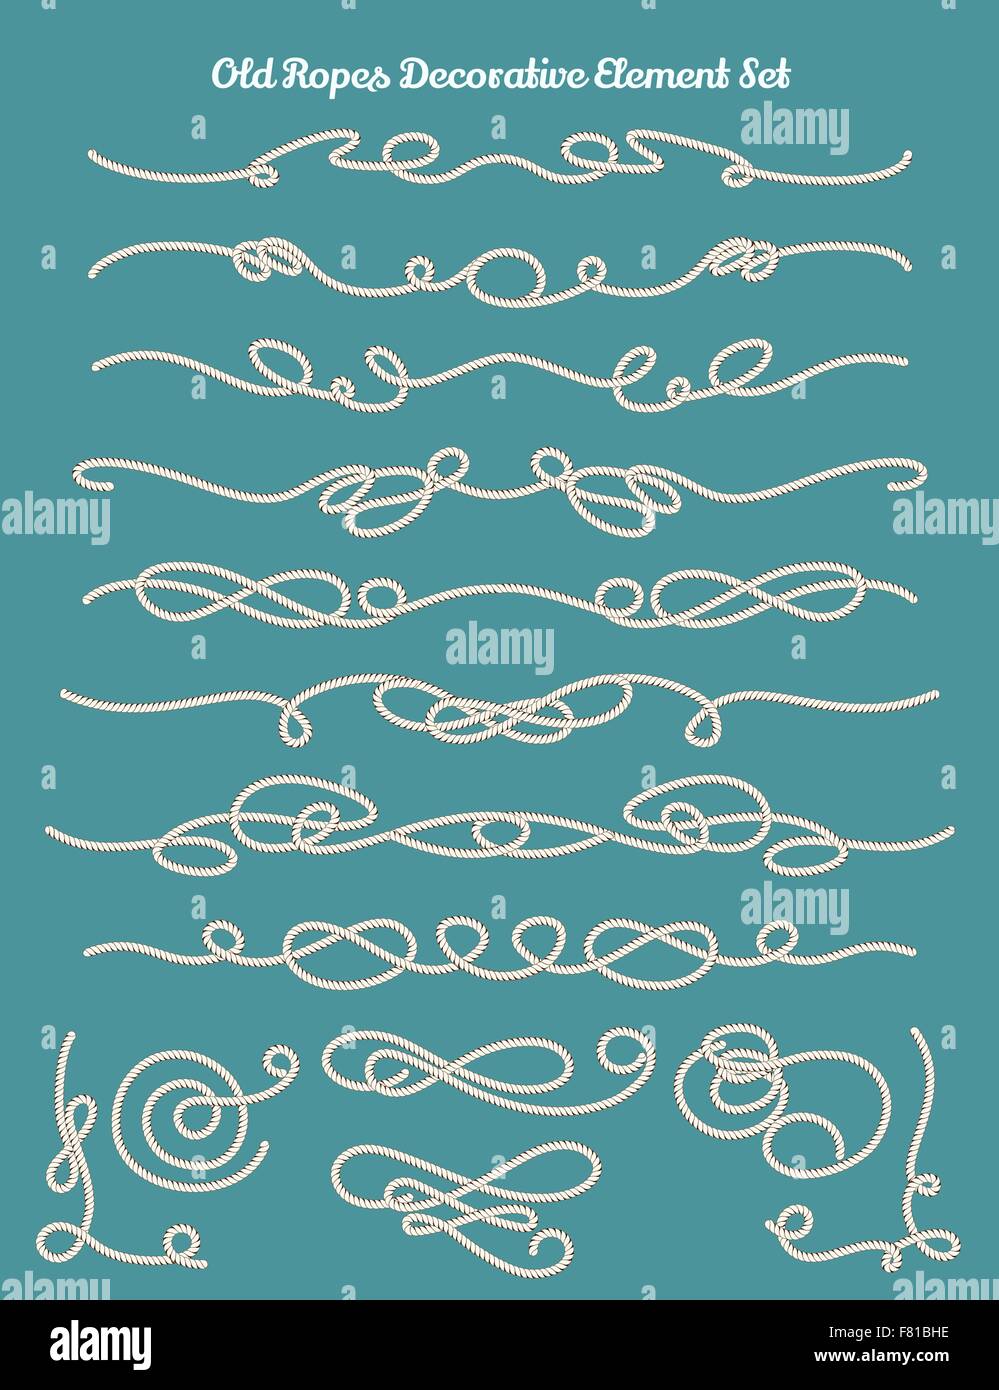 Set of Old Rope Design elements. Drawn in vintage style. Knots, corners, dividers and headers. Stock Vector